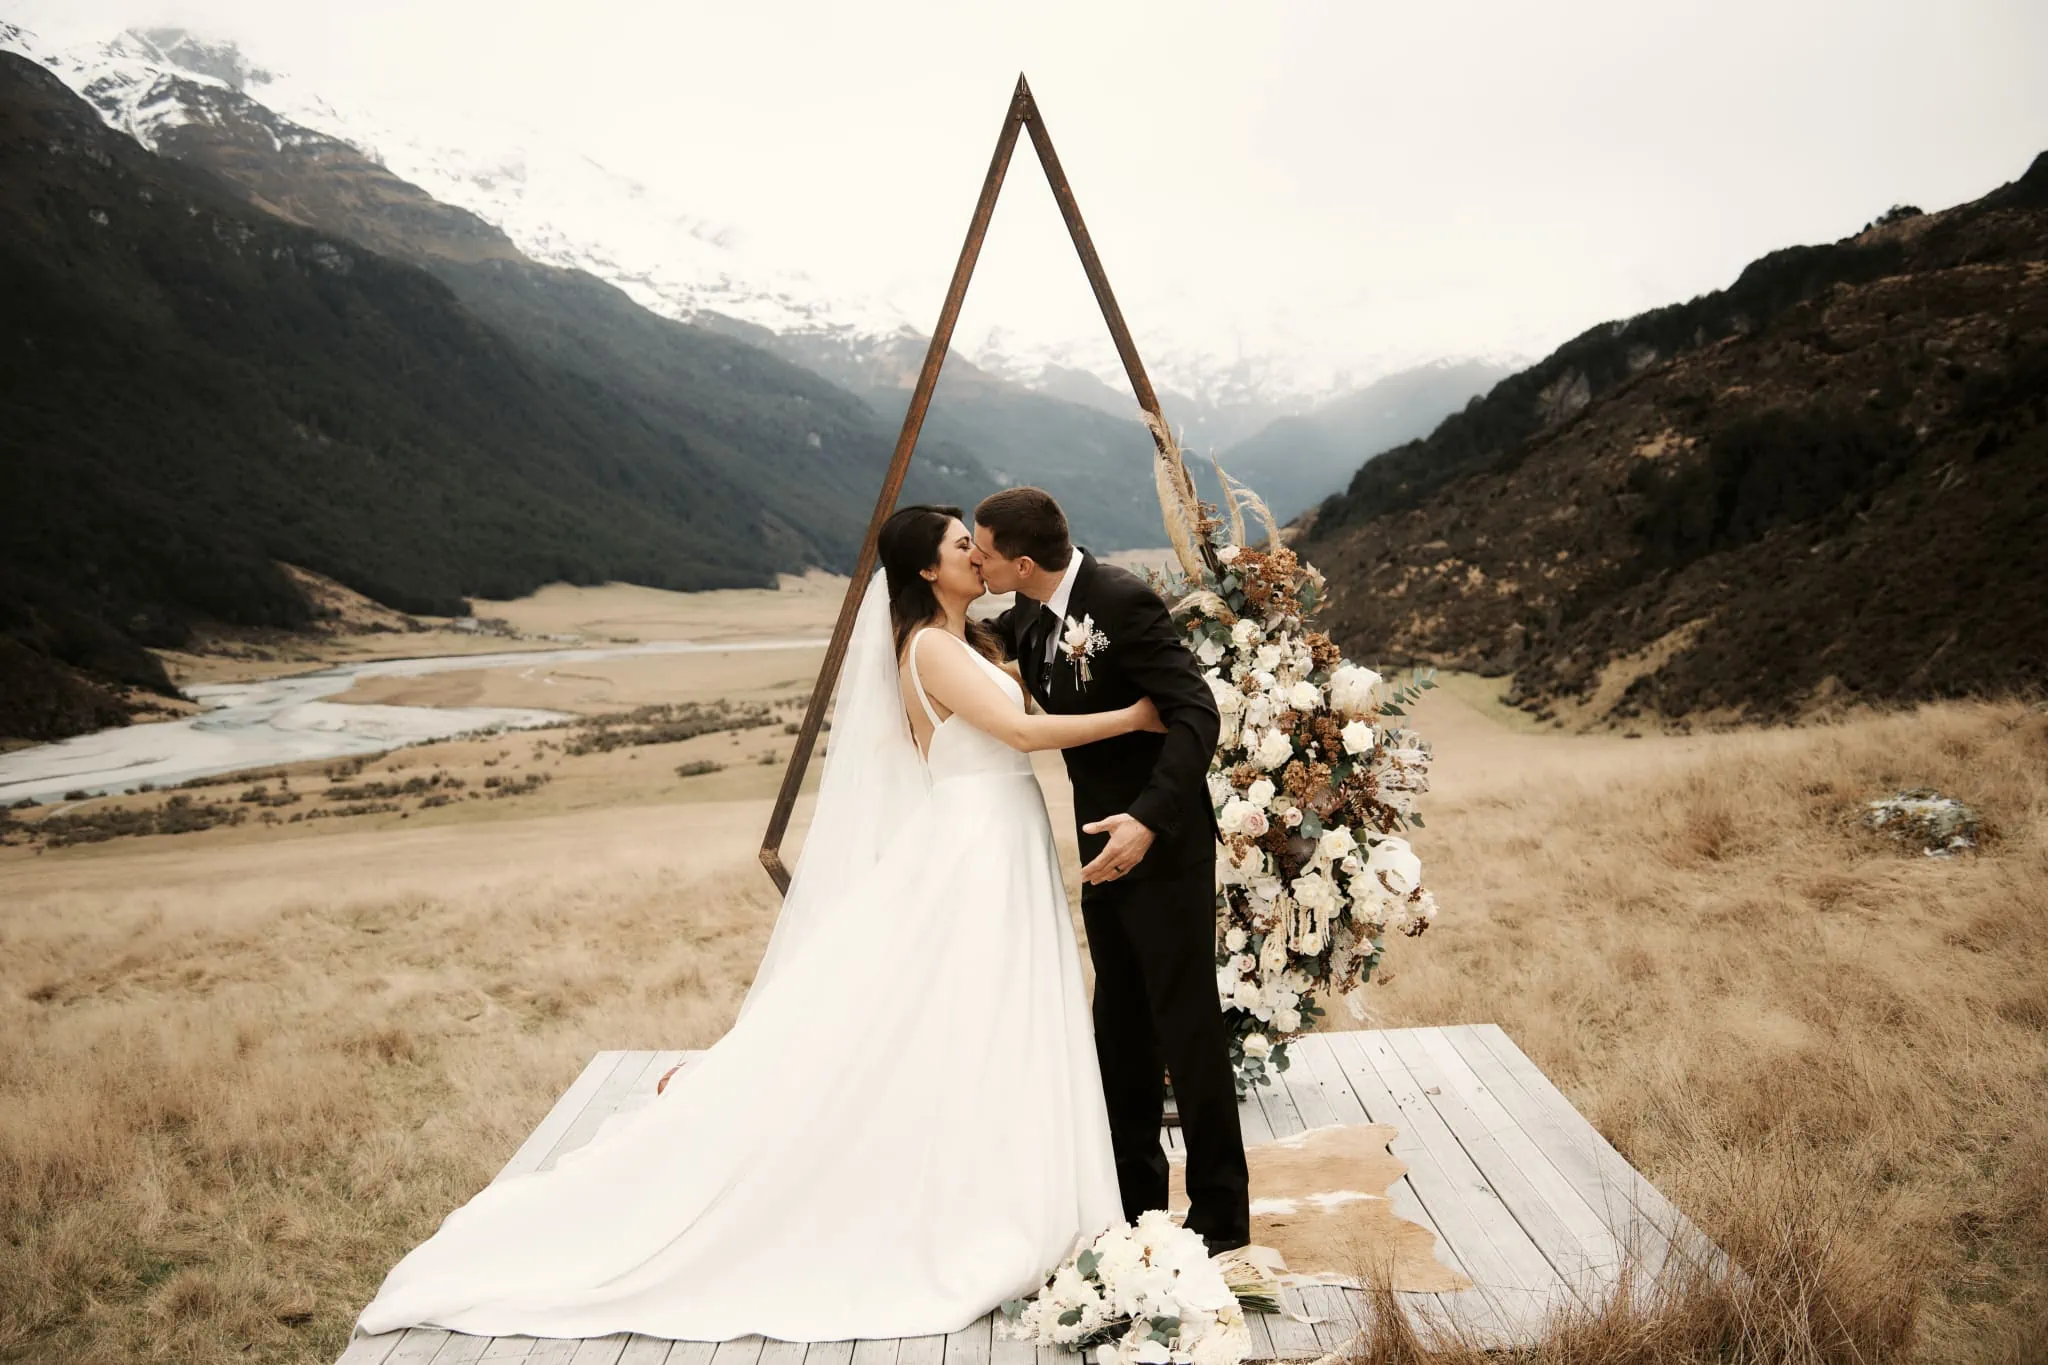 Michelle and Vedran share a kiss during their intimate Rees Valley Station elopement wedding, with stunning mountains as their backdrop.